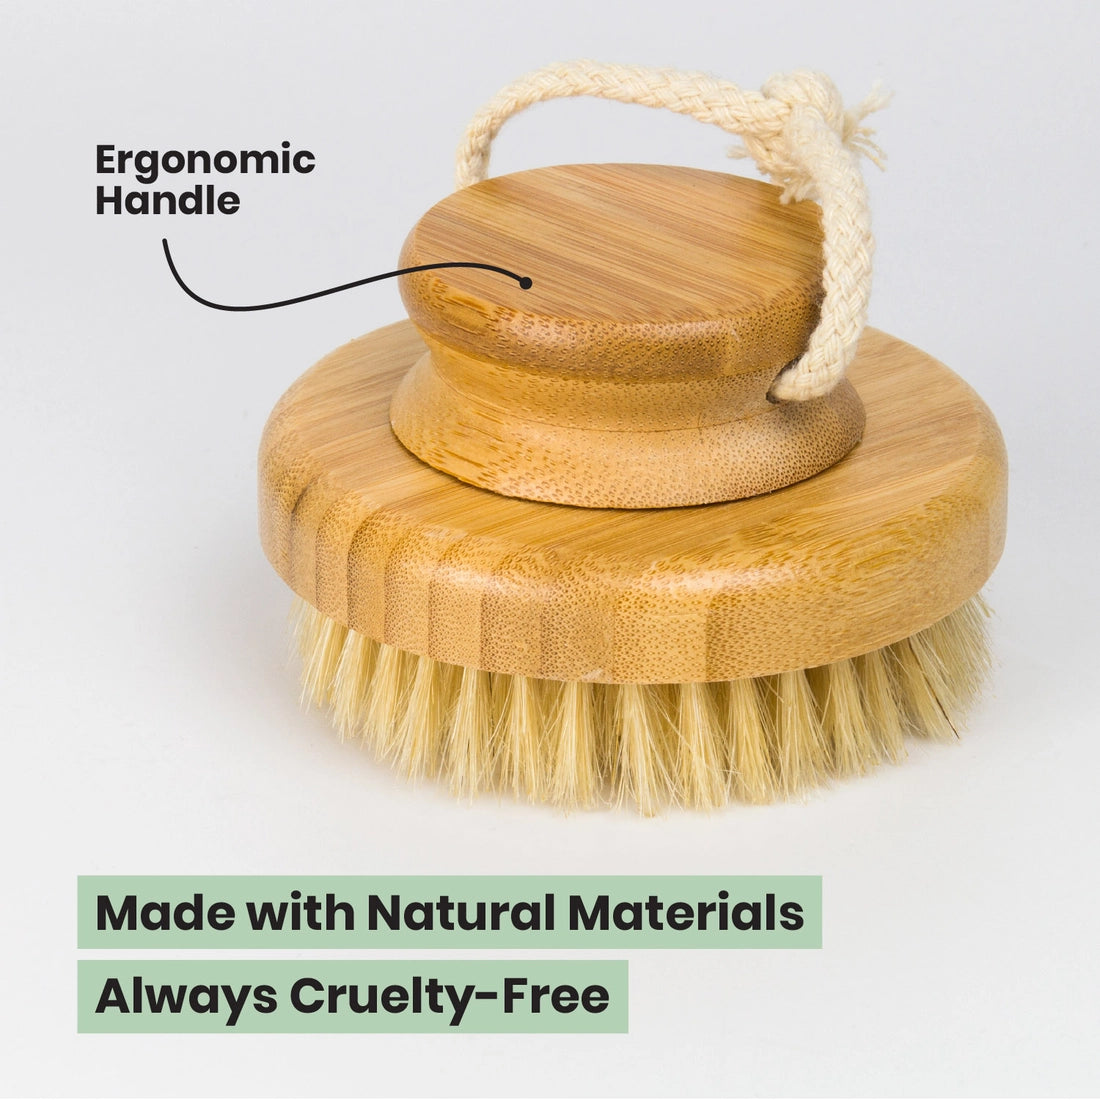 Luxury Bamboo Vegan Dry Brush, USA Brand, Dry Brush for Body with  Agave/Plant Based Bristles (Firm/Extra Firm) with Stylish Bamboo Oval  Handle, For